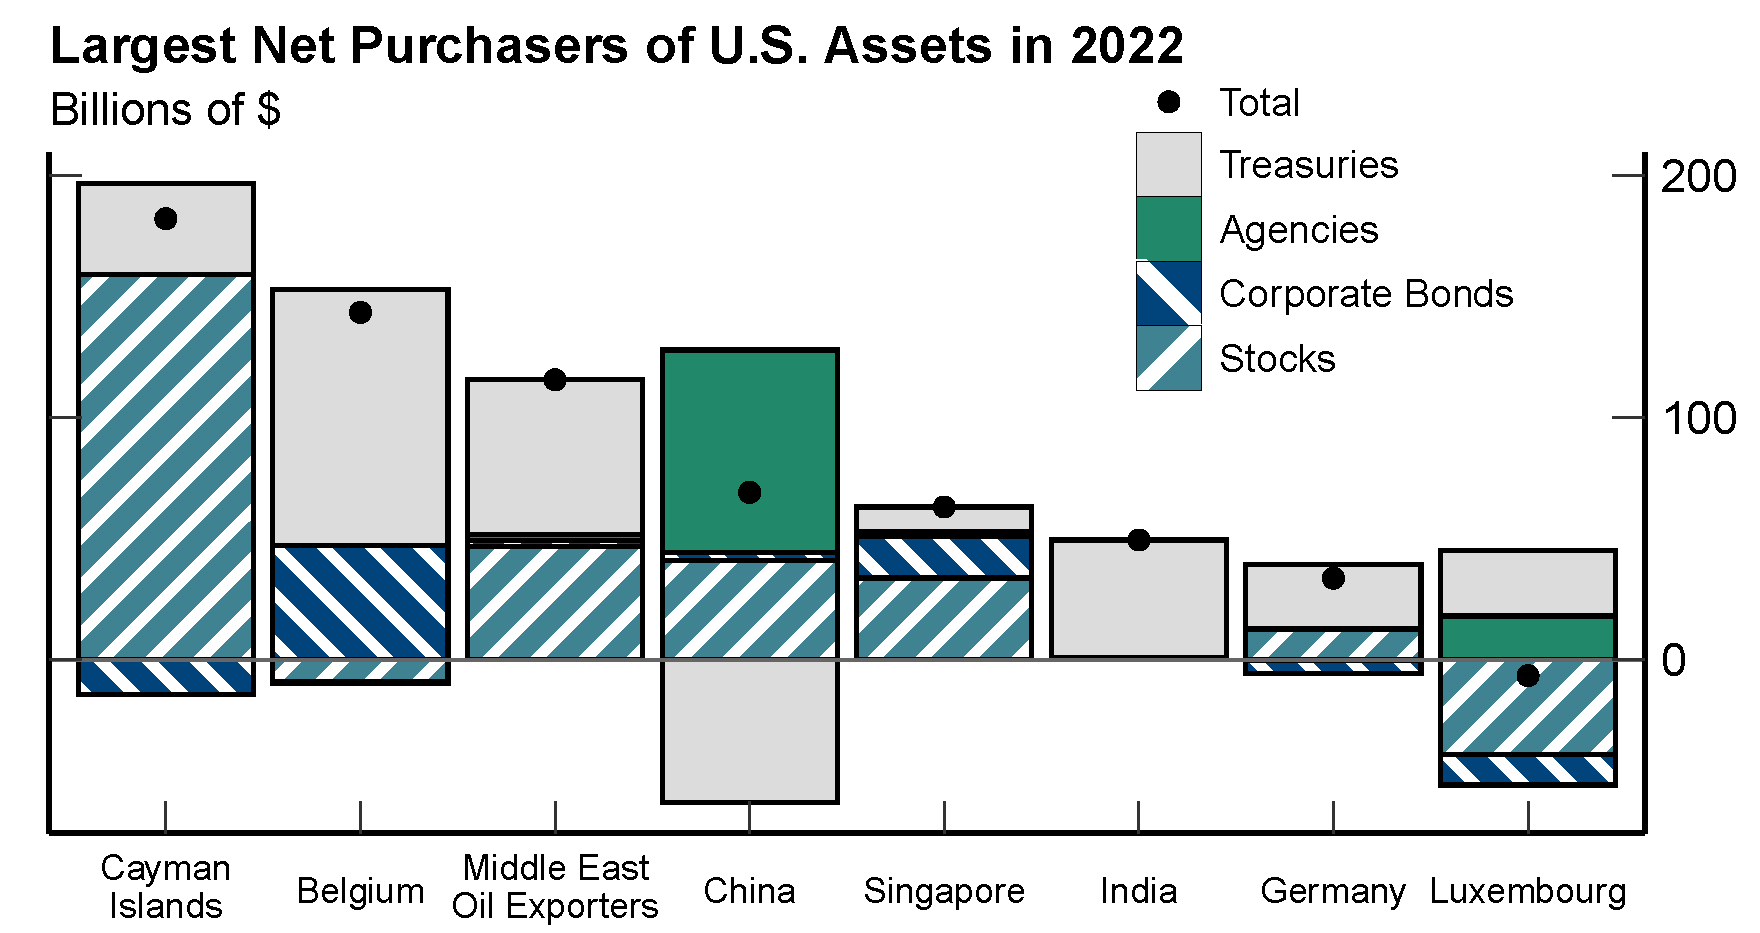 Figure 1. Largest Net Purchasers of U.S. Assets in 2022. See accessible link for data.